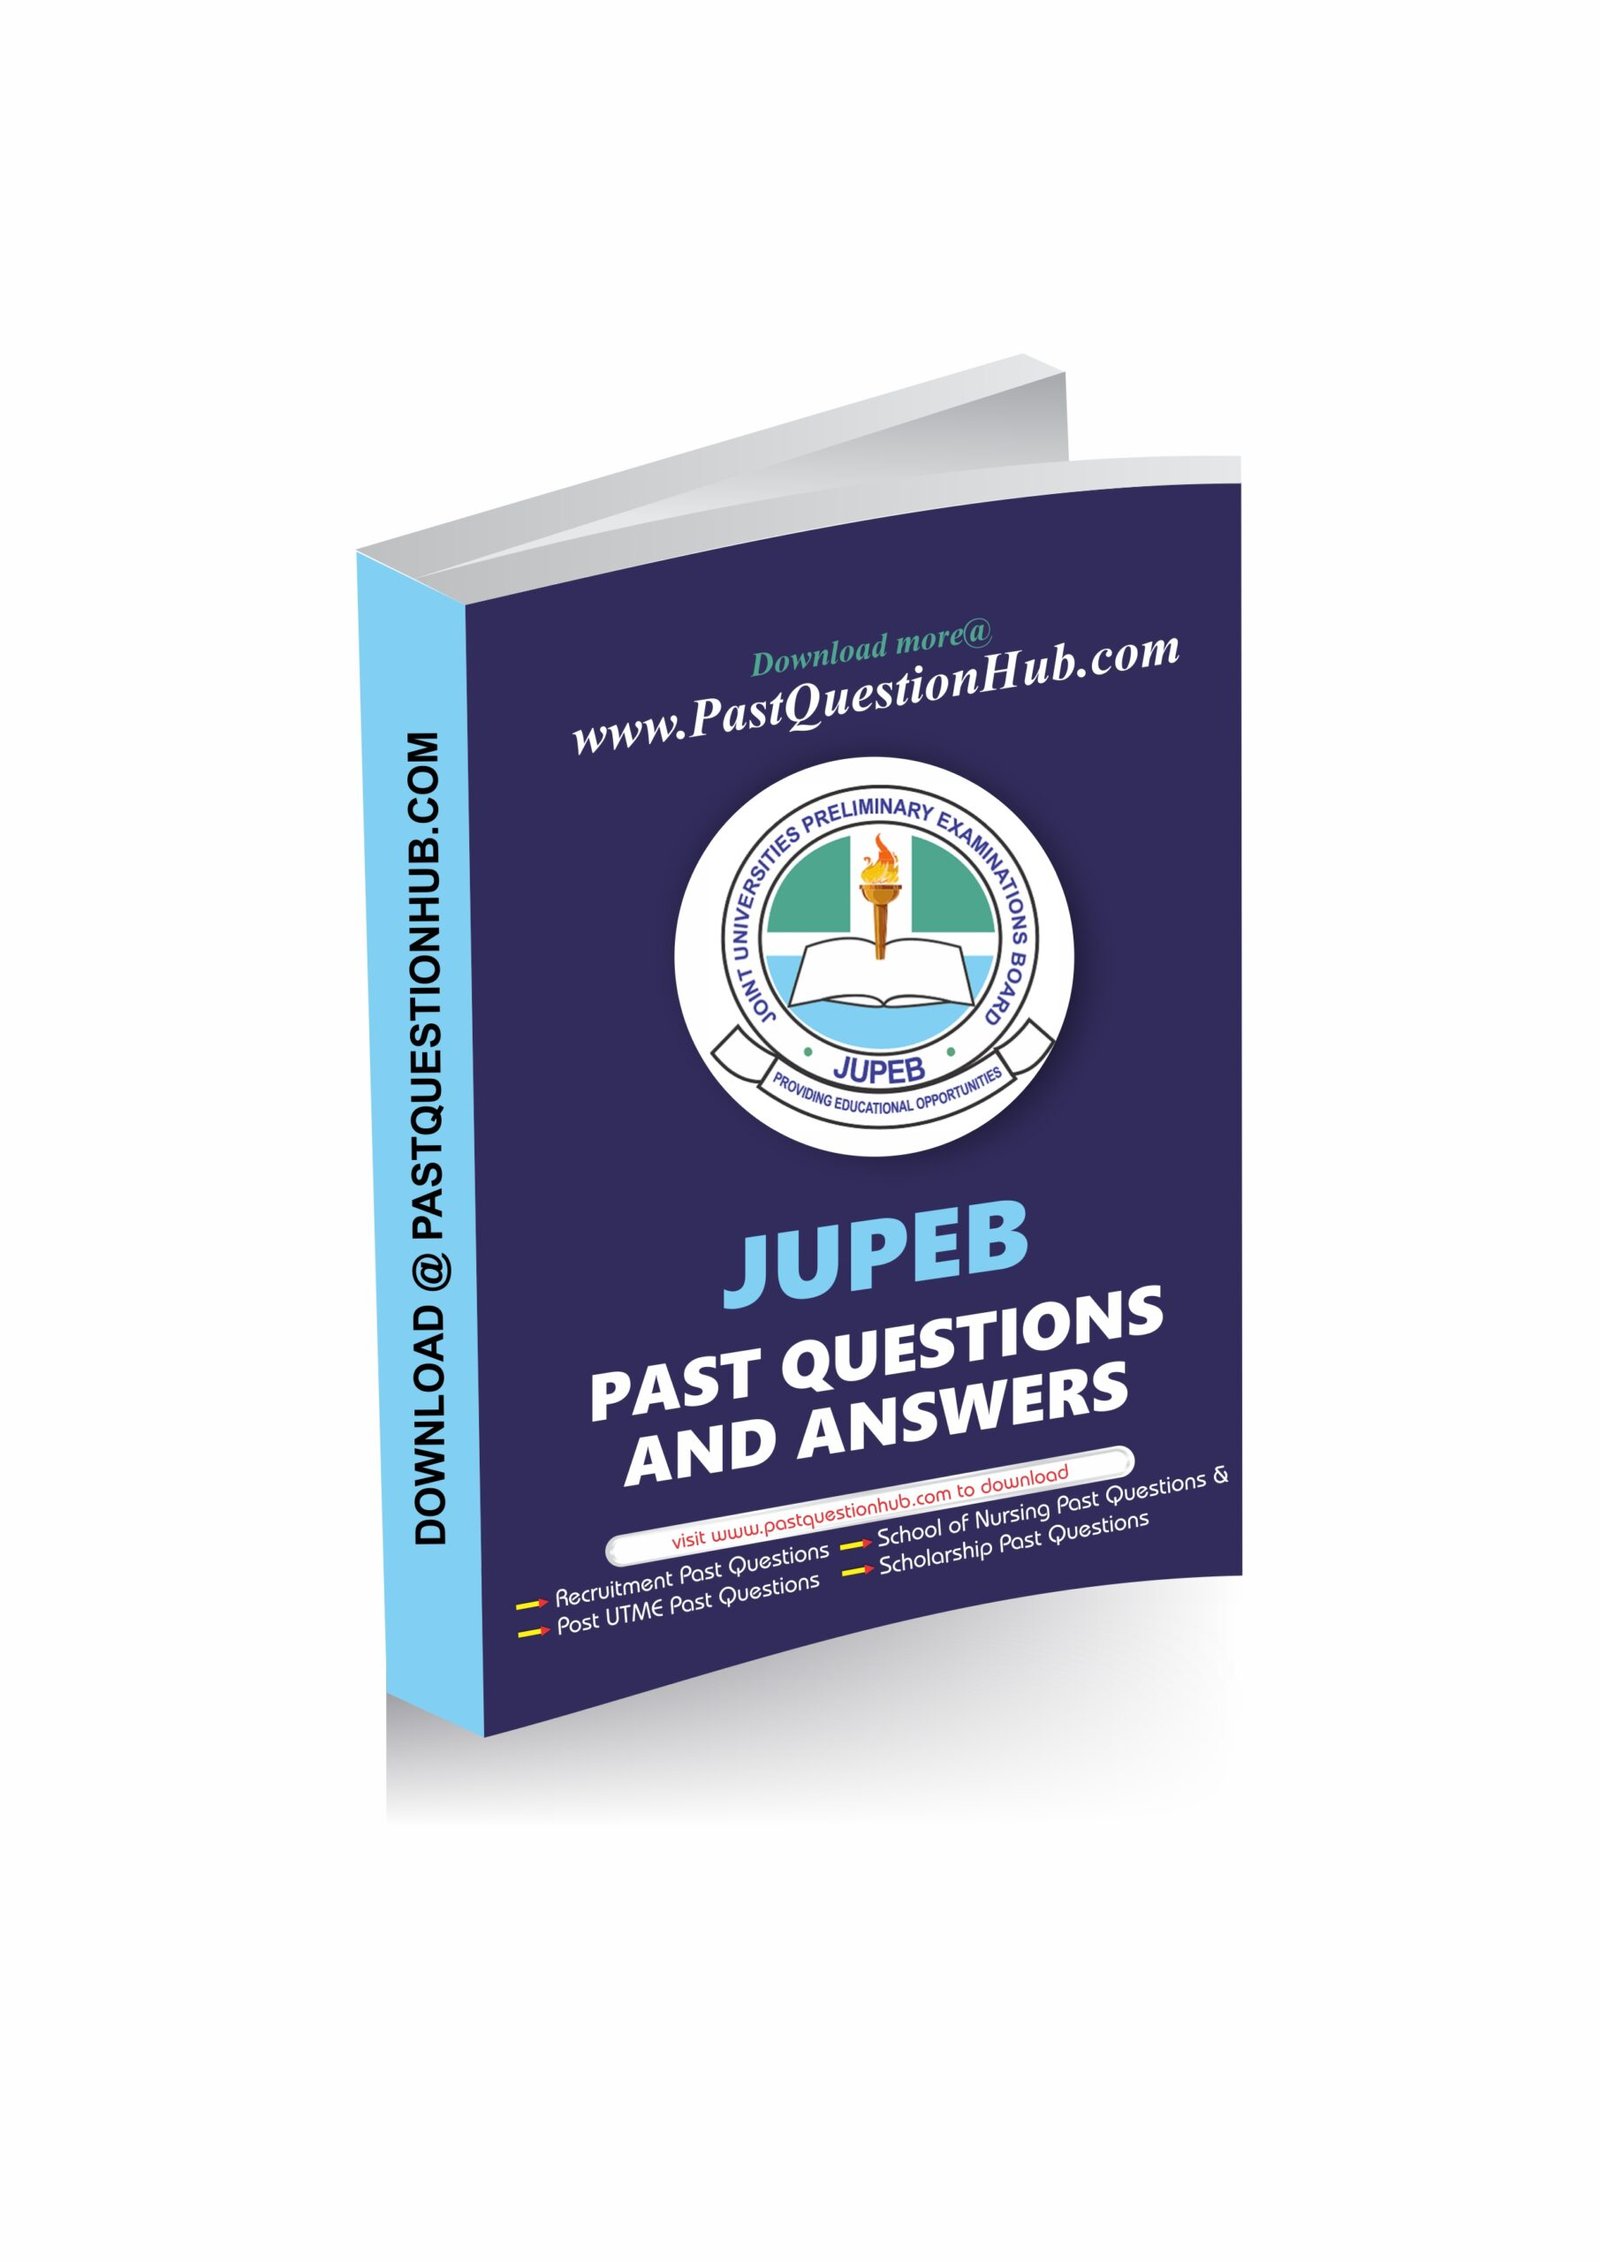 Jupeb Past Questions and Answers PDF Updated Download Now